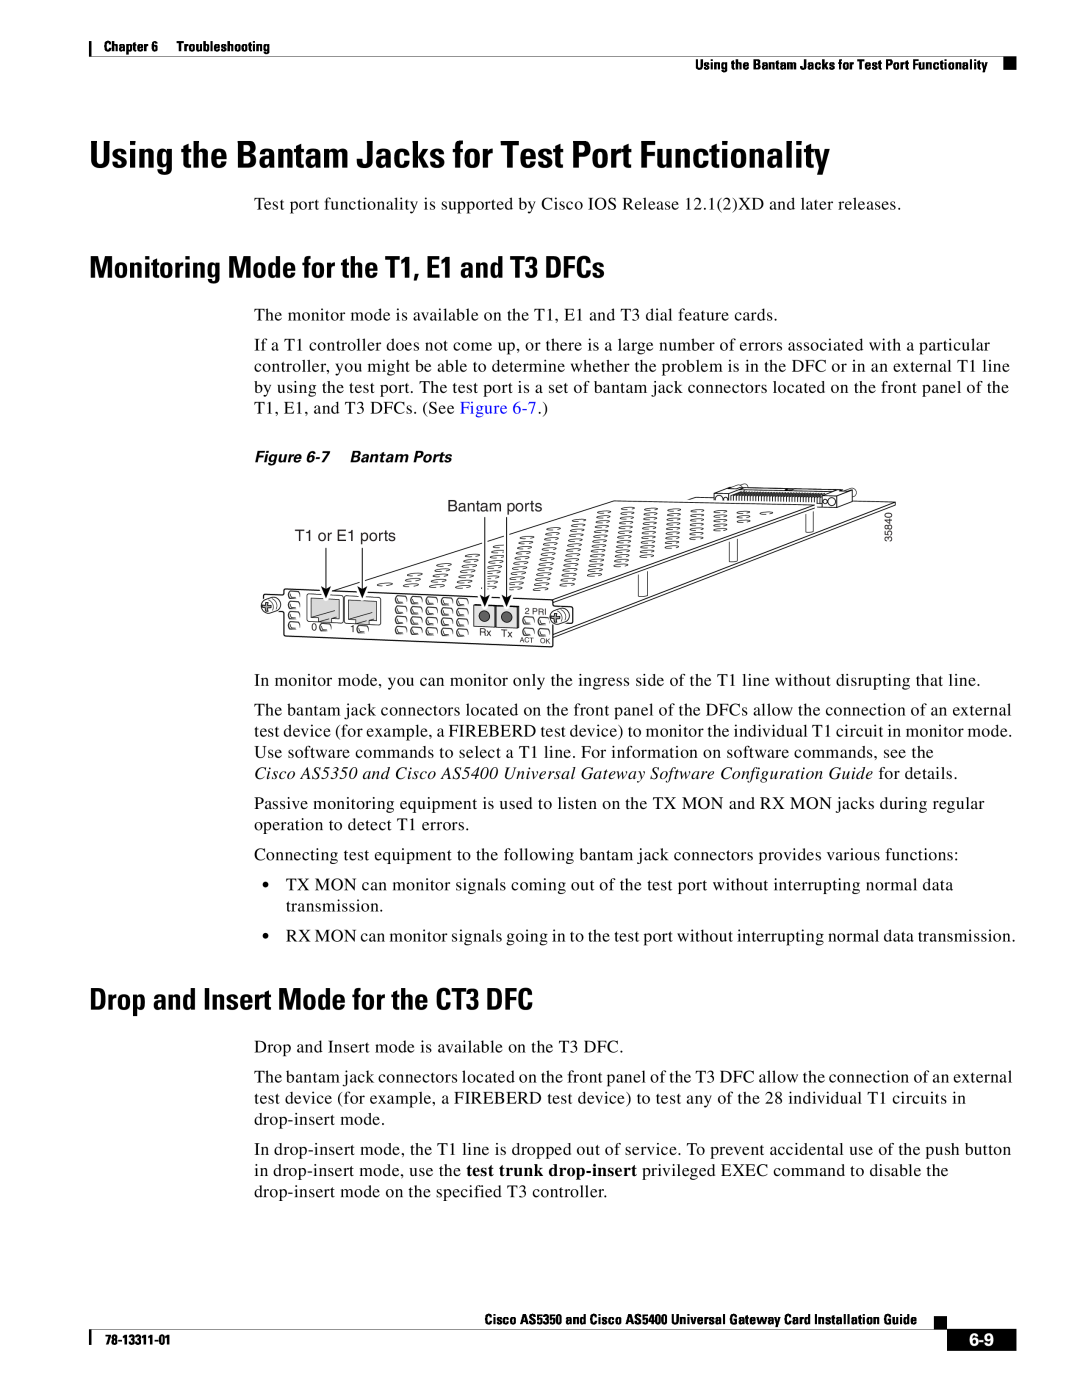 Cisco Systems AS5400 manual Using the Bantam Jacks for Test Port Functionality, Monitoring Mode for the T1, E1 and T3 DFCs 